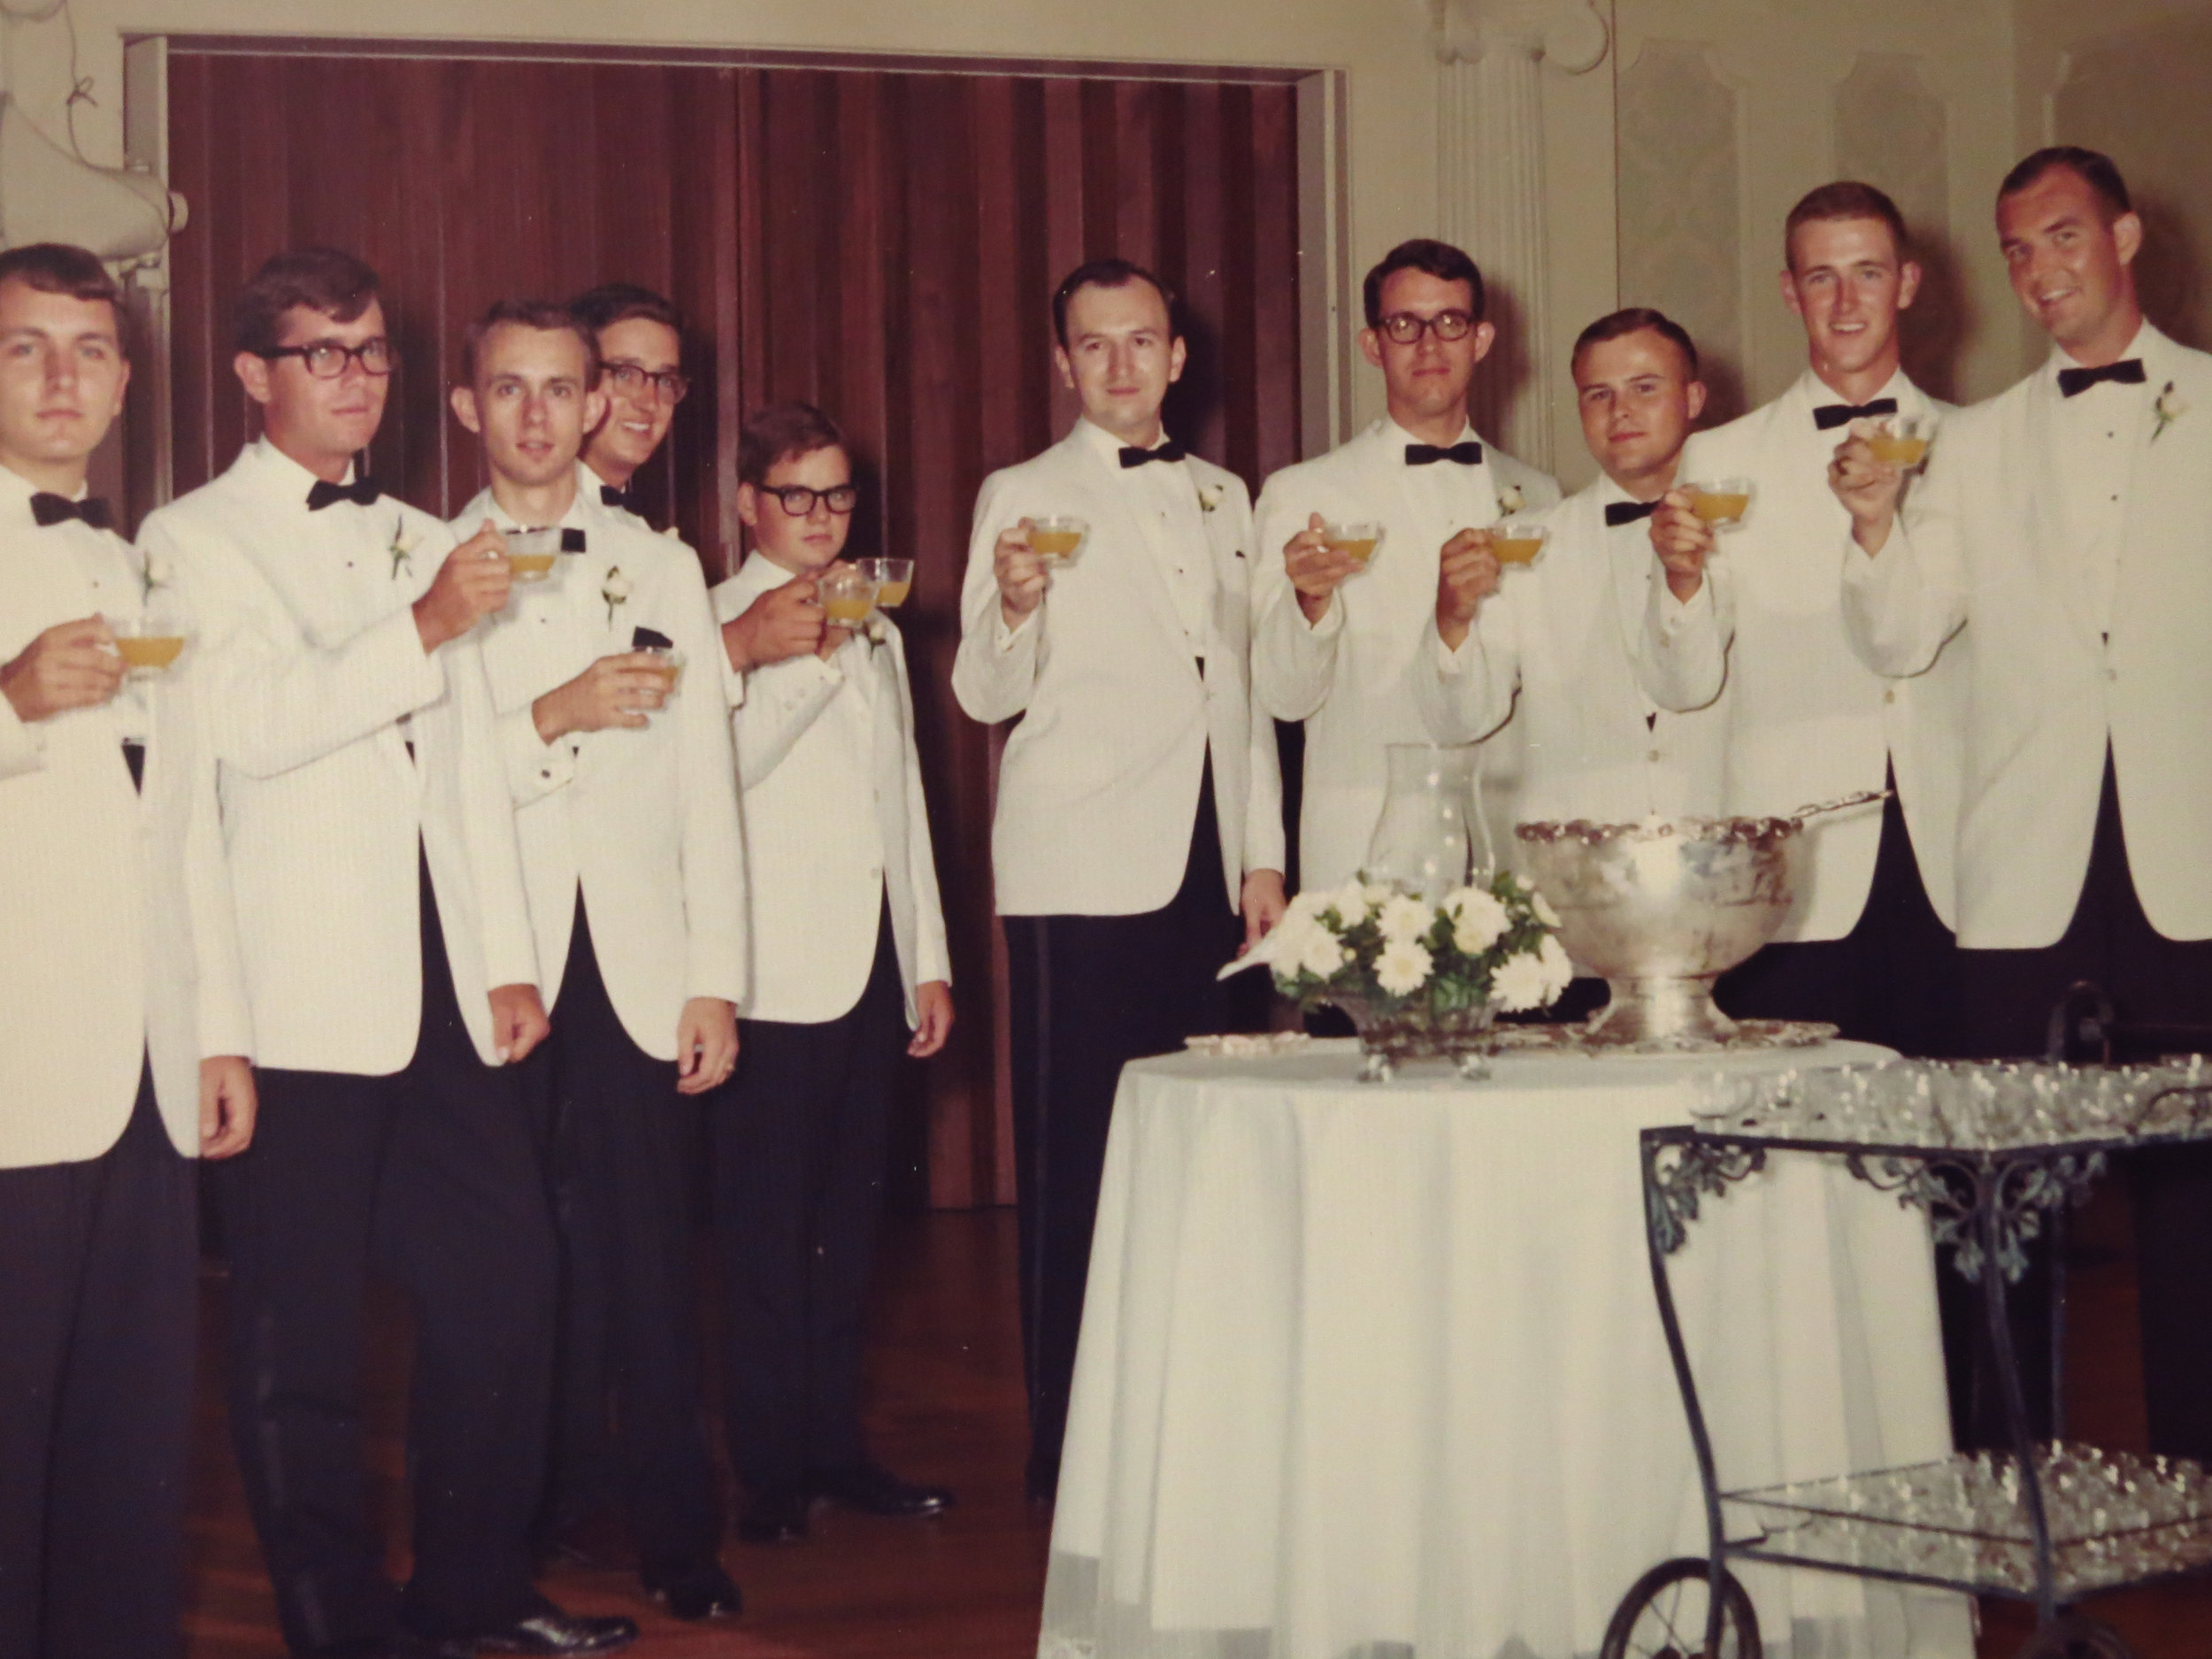  Two of these handsome guys are my uncles. 